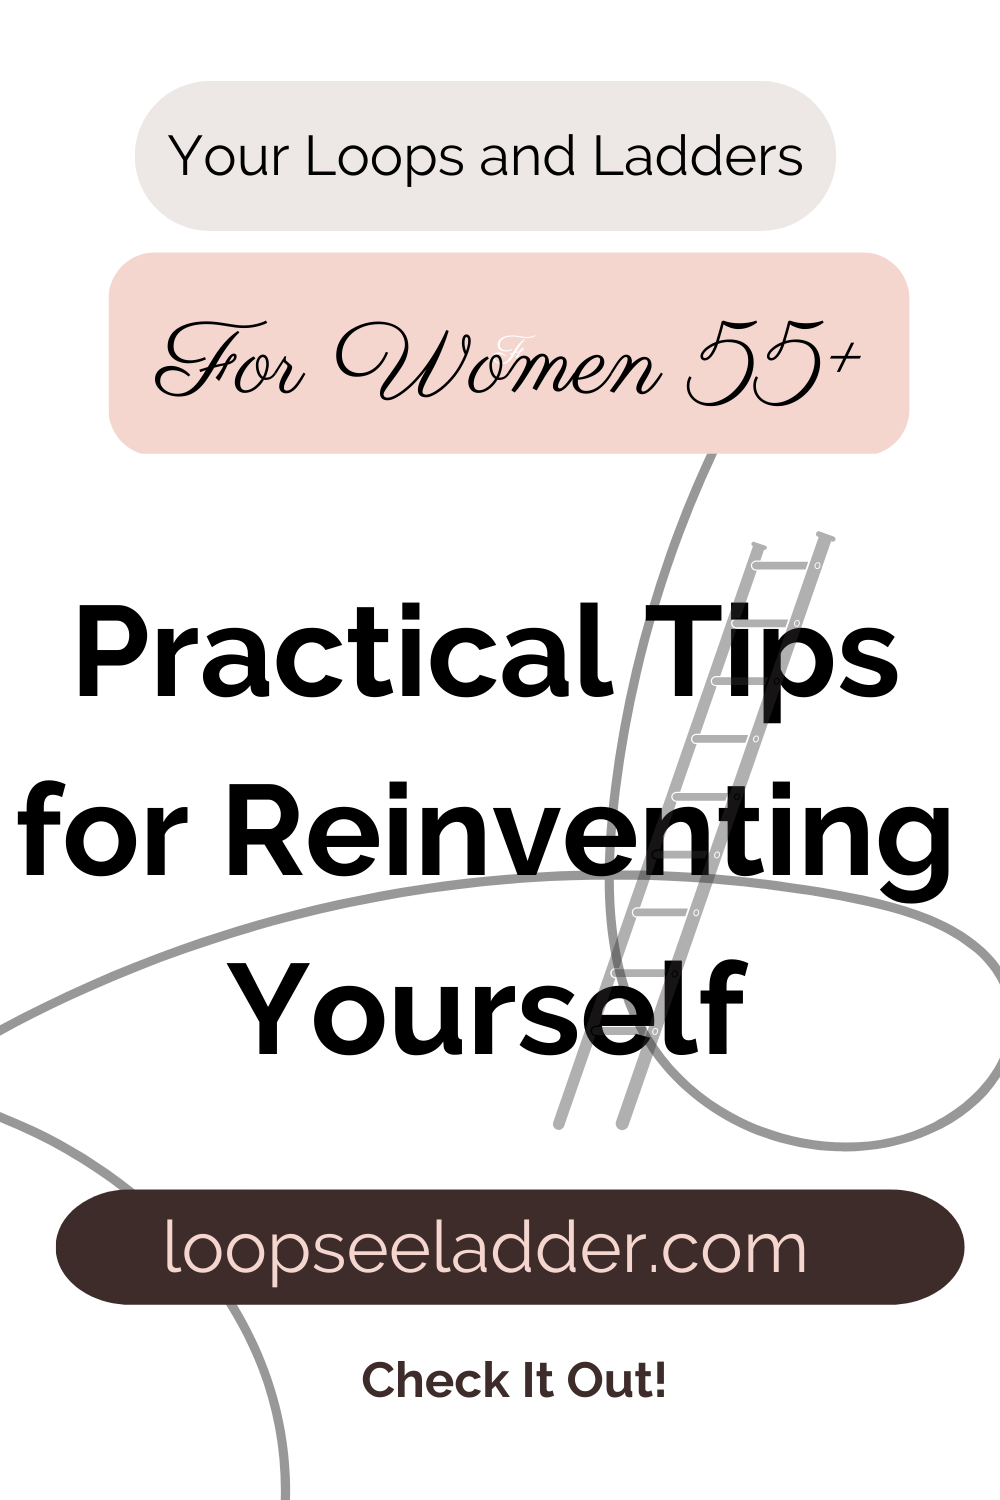 Practical Tips for Reinventing Yourself